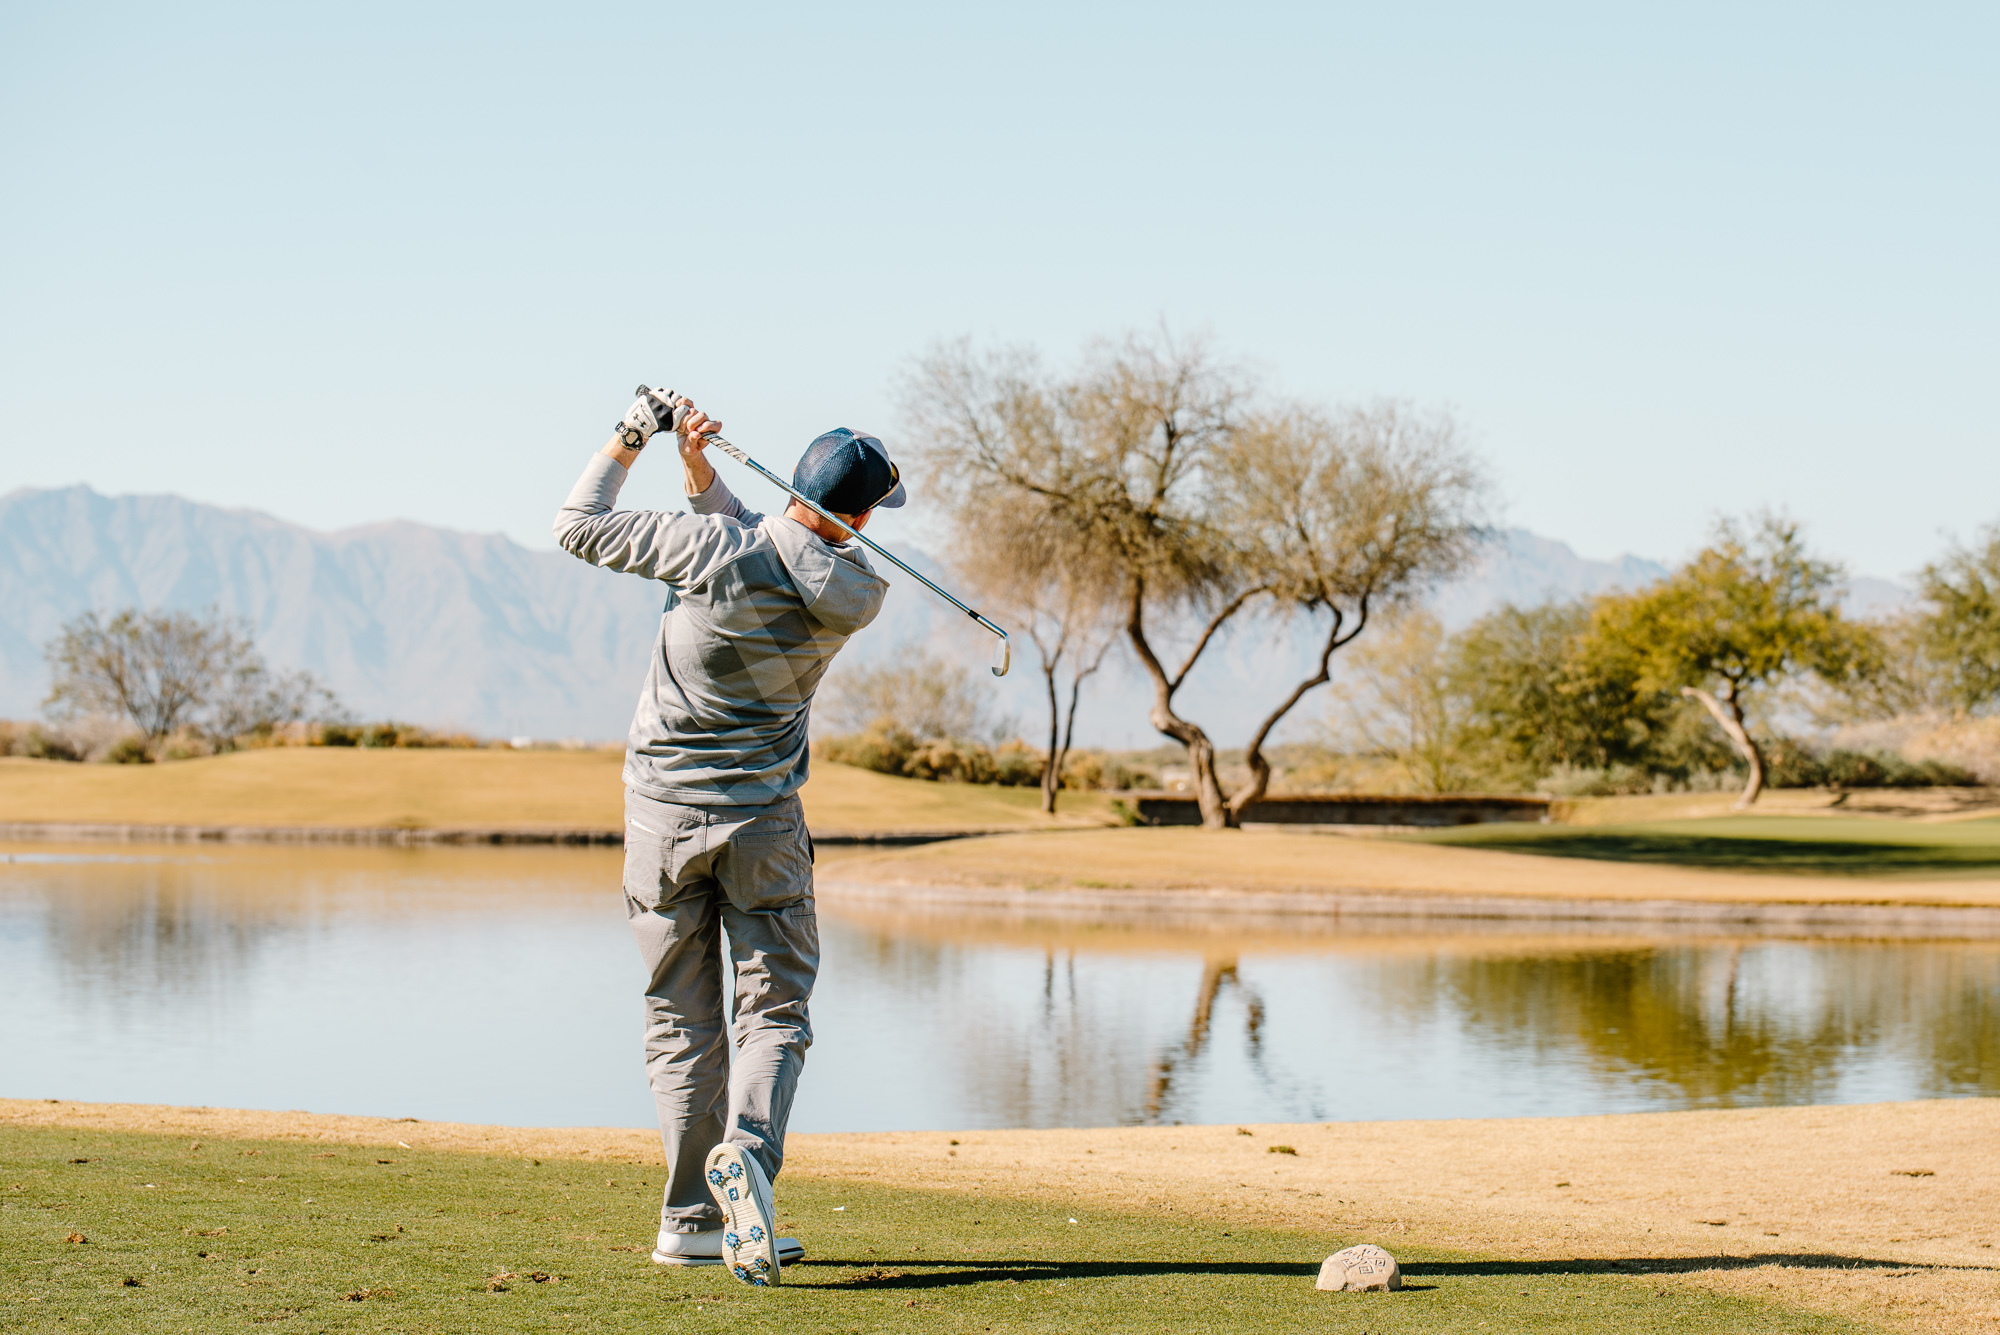 A man enjoying the Spring on the Green, swinging his golf club in front of a pond.